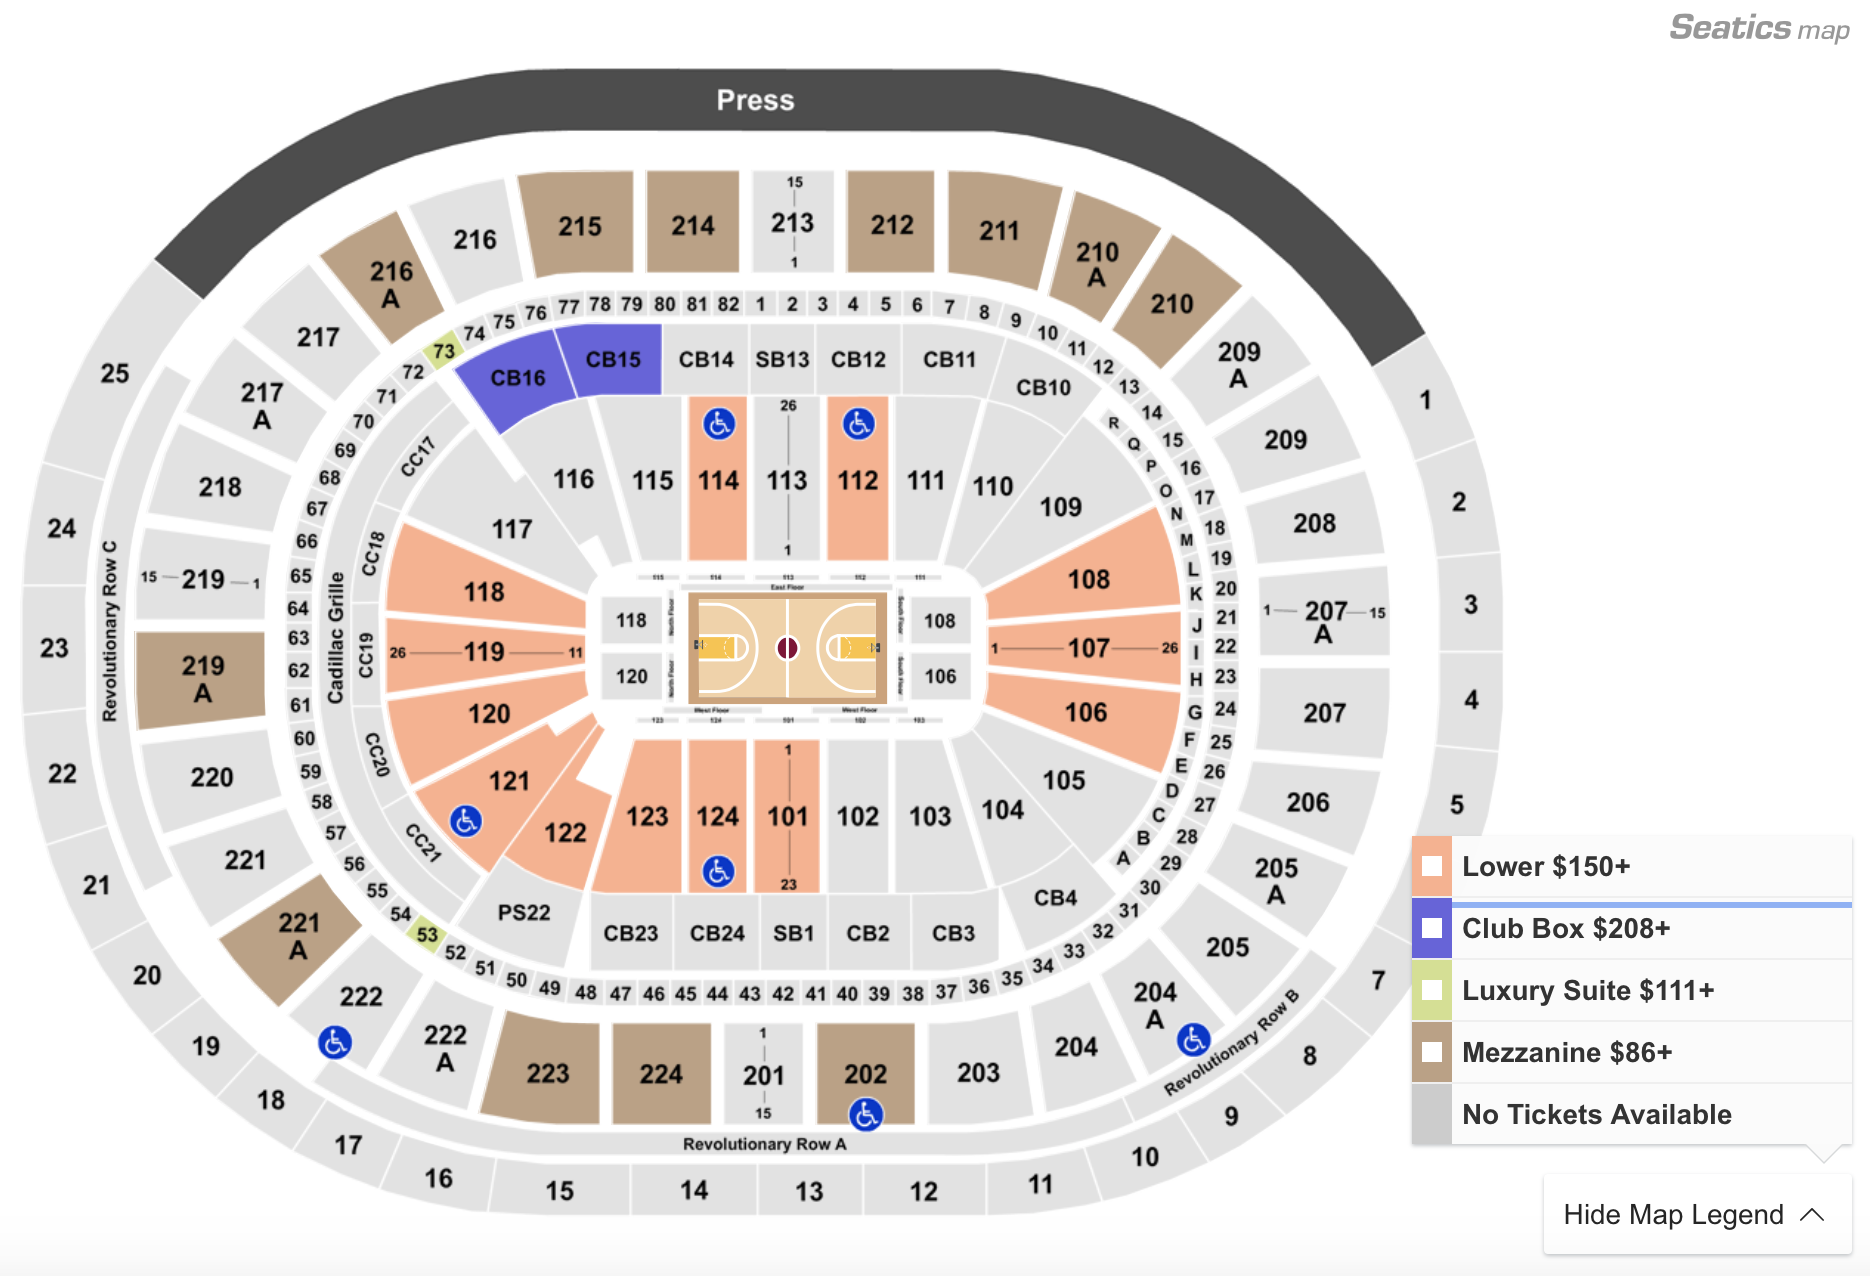 Timberwolves Seating Chart With Rows